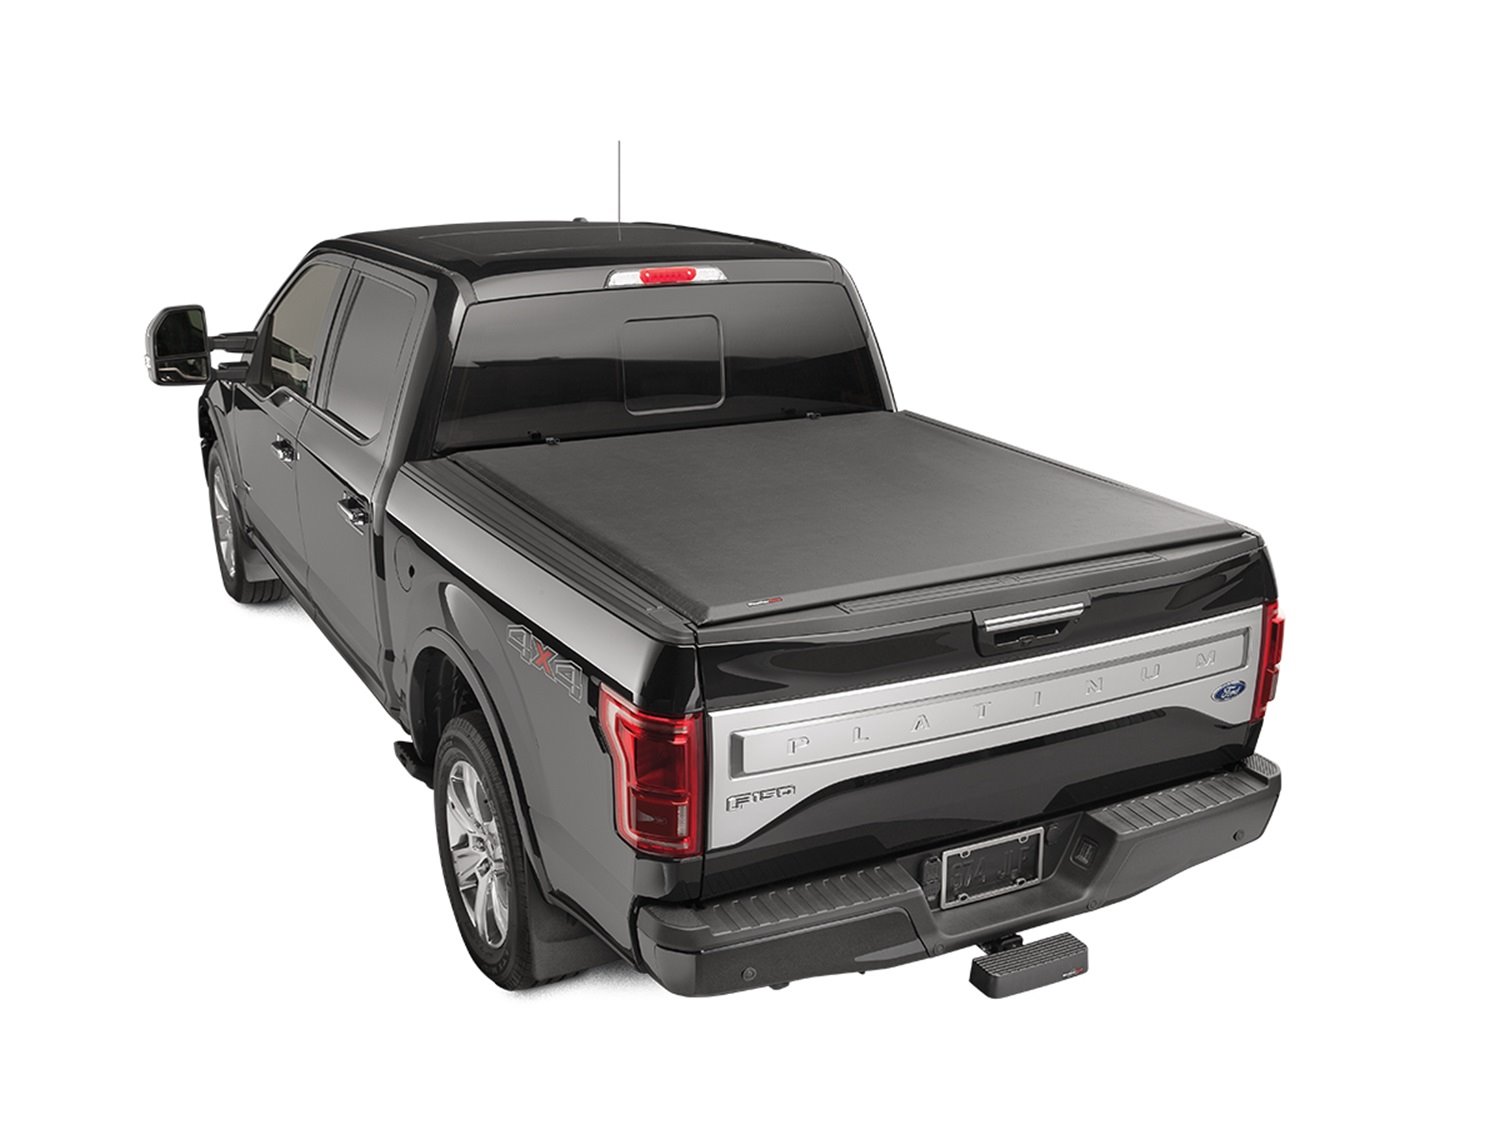 ROLL UP TRUCK BED COVER B DODGE RAM 2009-2017 RAM 5 7 BED W/ RAMBOX